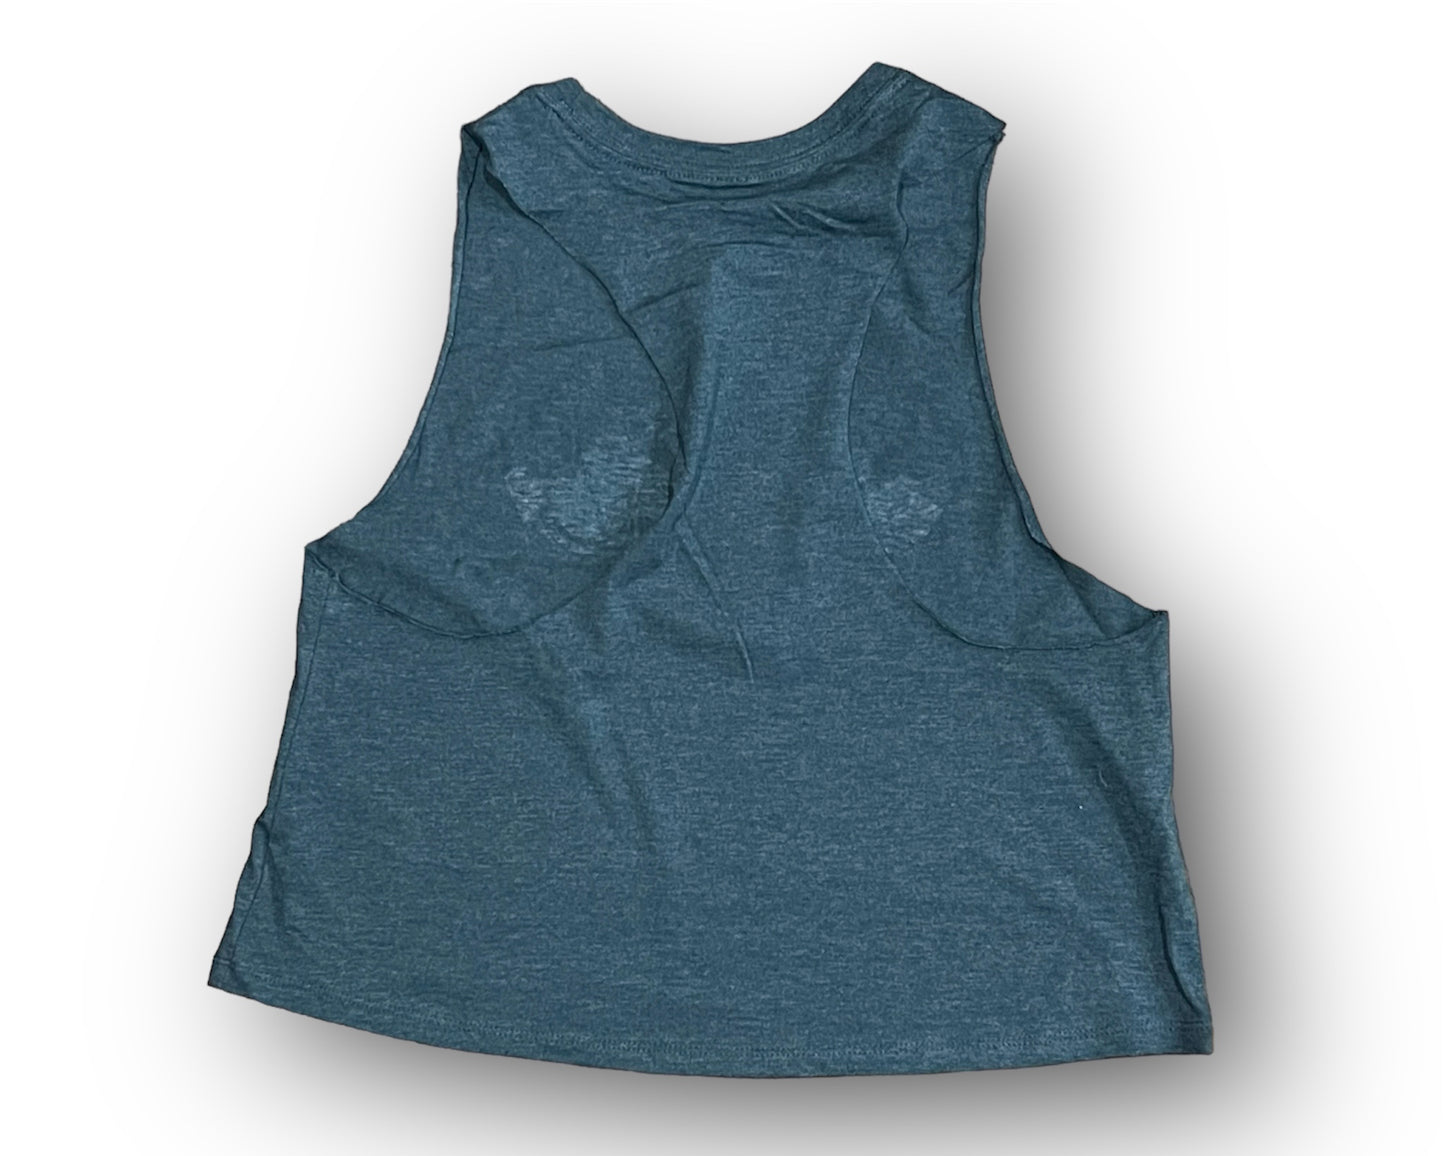 Indianapolis Motor Speedway Wing and Wheel Women's Crop Racerback Tank by Justin Patten (2 Colors)